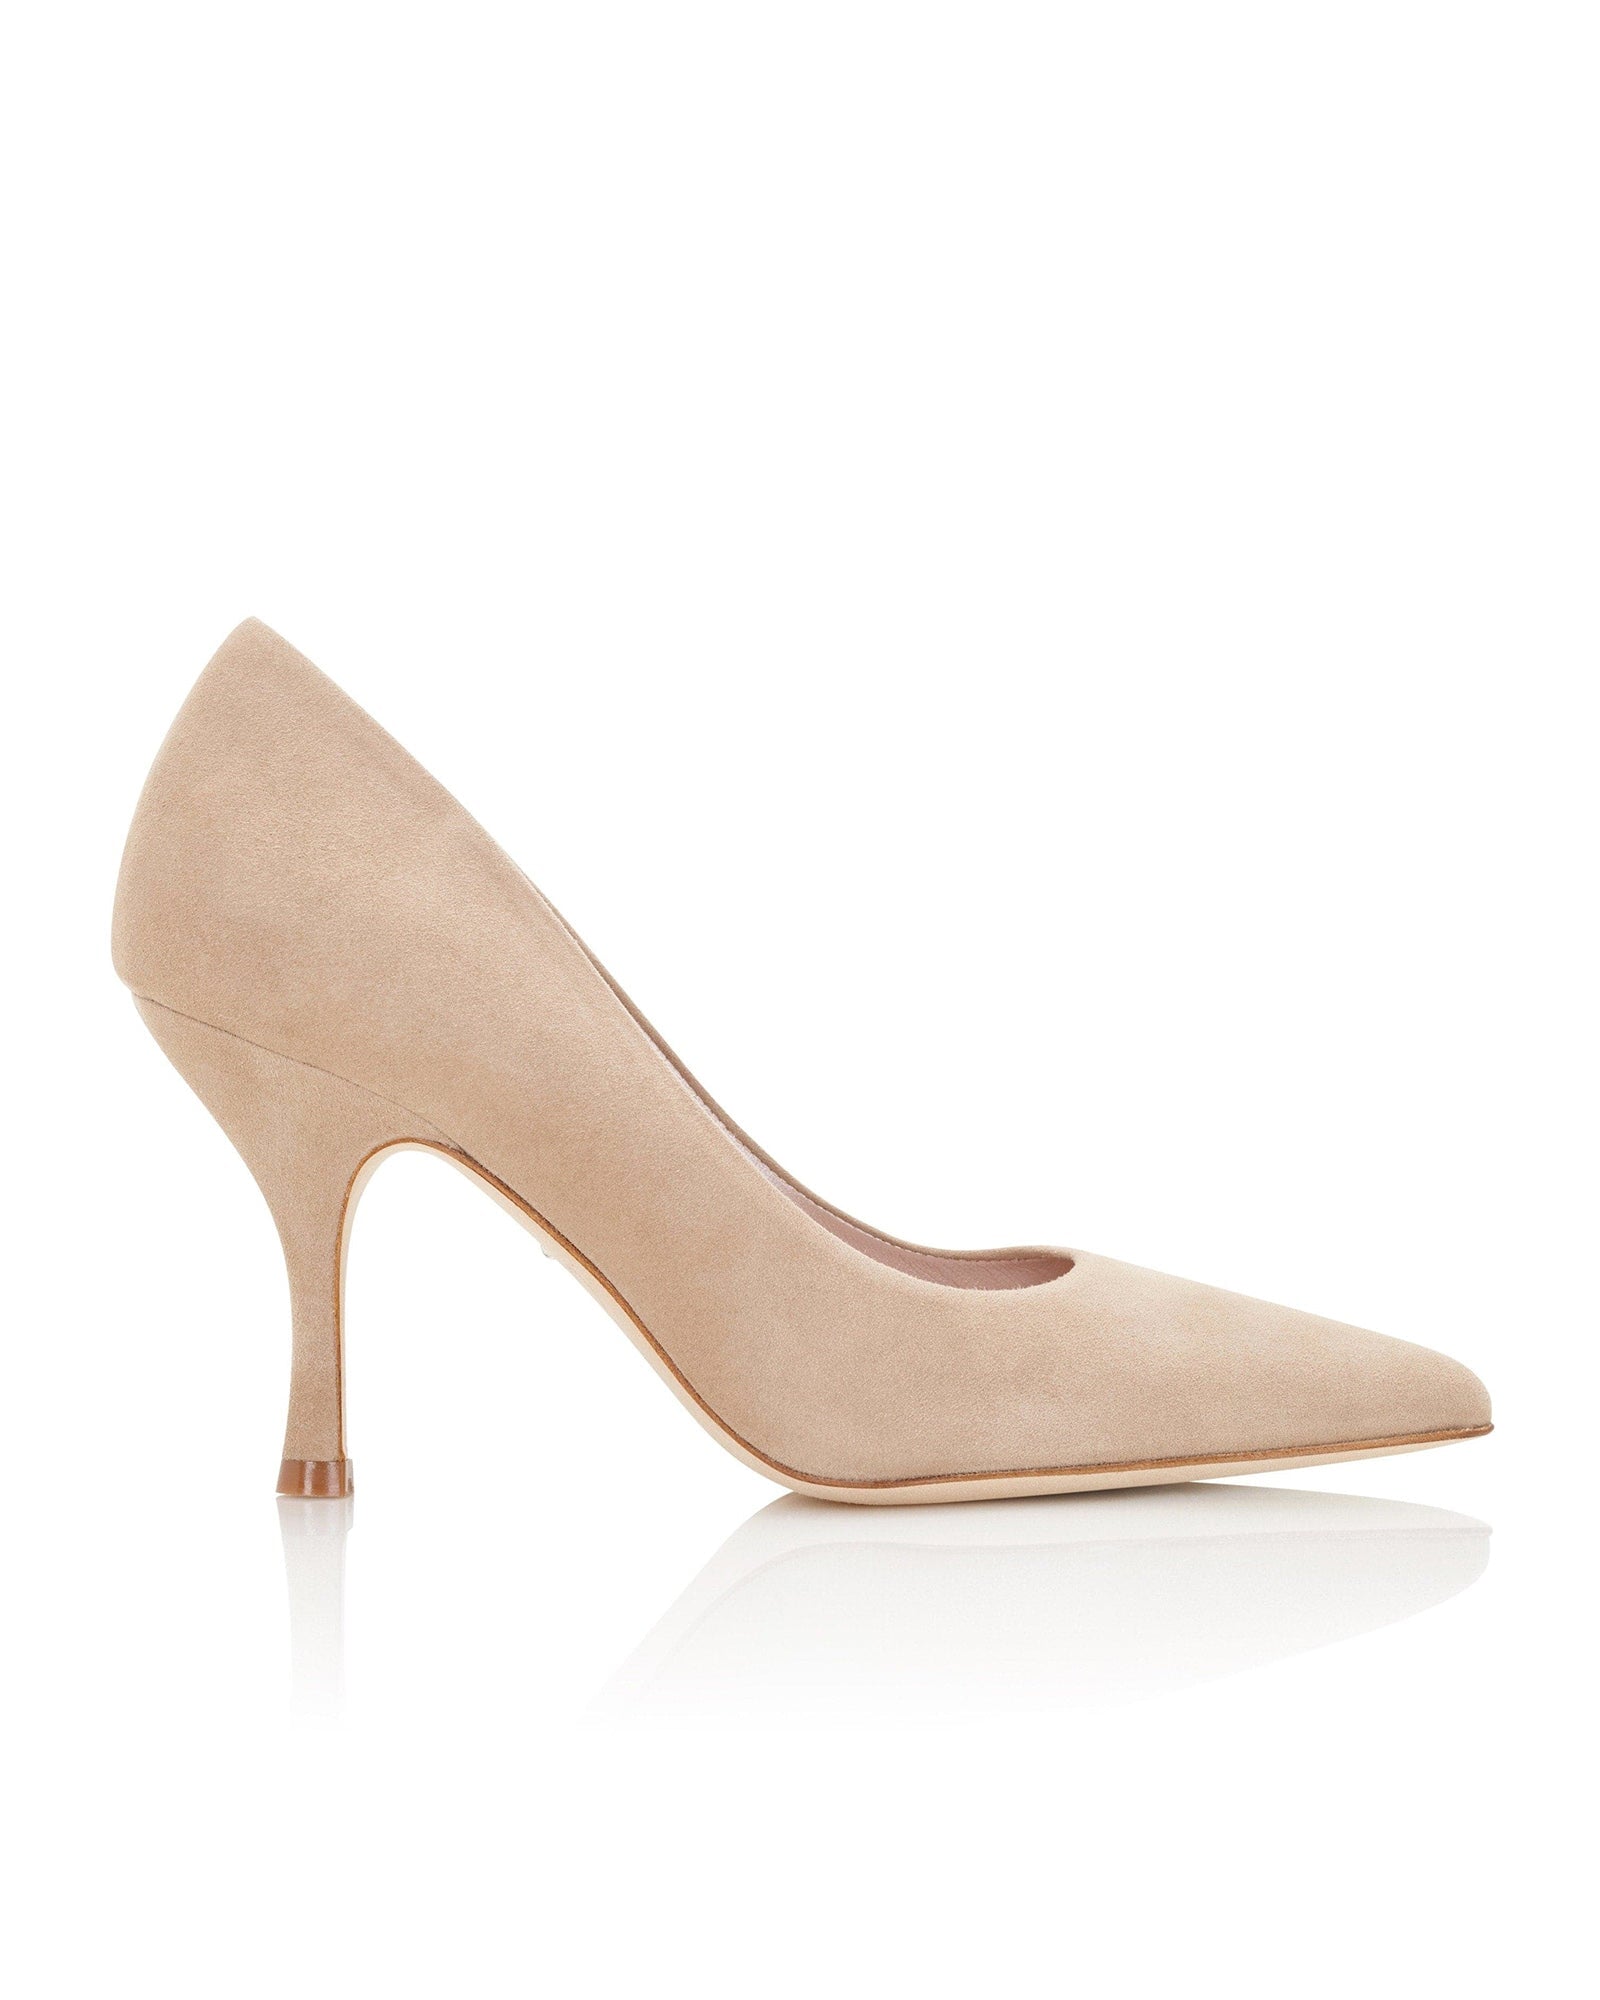 Olivia Biscuit Fashion Shoe Nude Suede Court Shoe  image